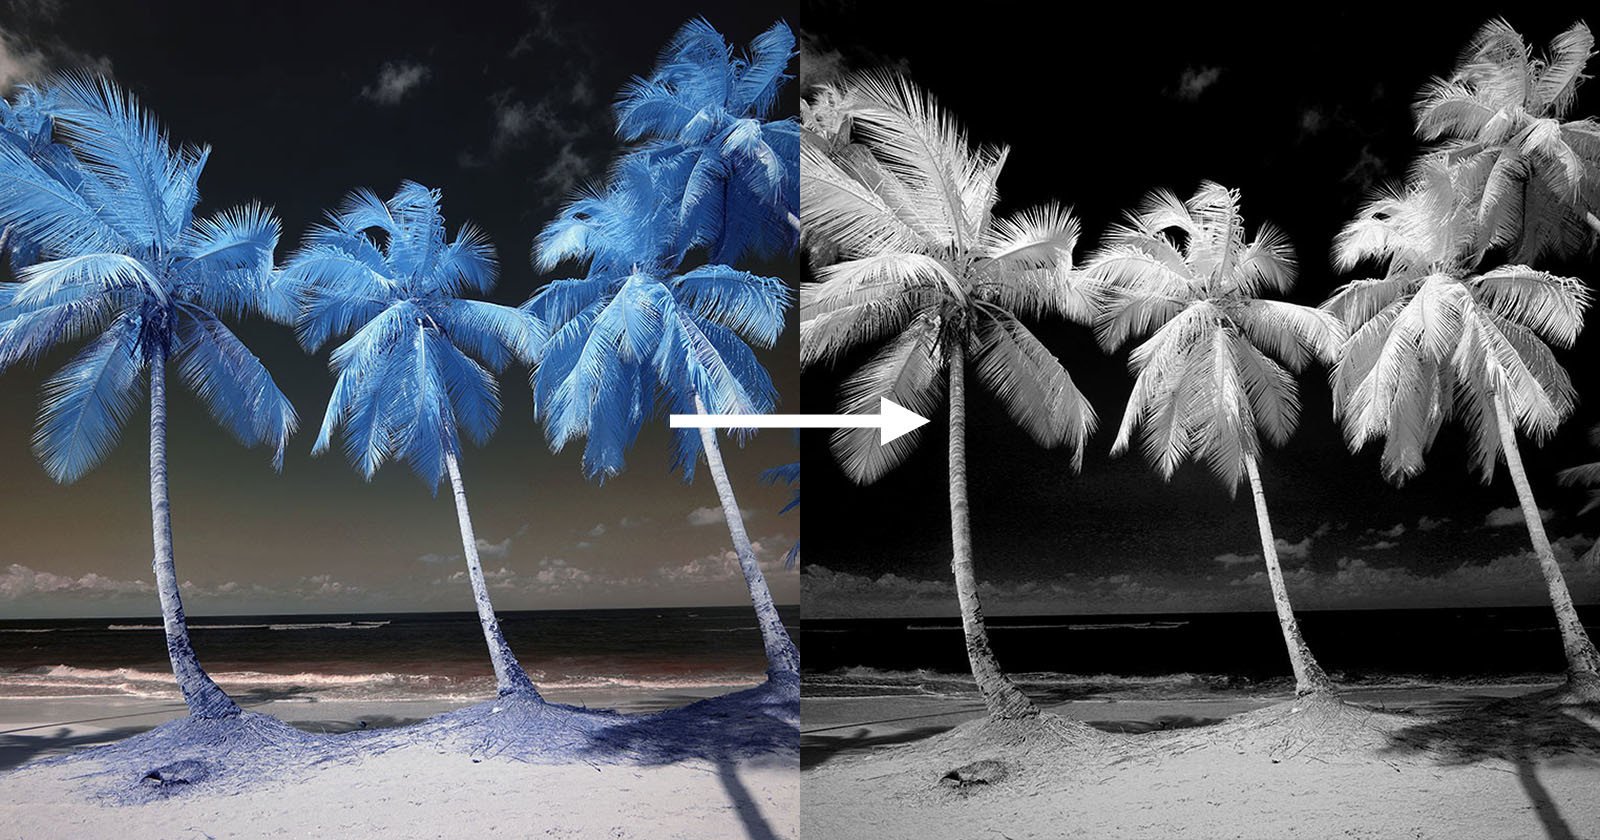 3 Steps to Creating a Dramatic B&W Infrared Photo in Photoshop